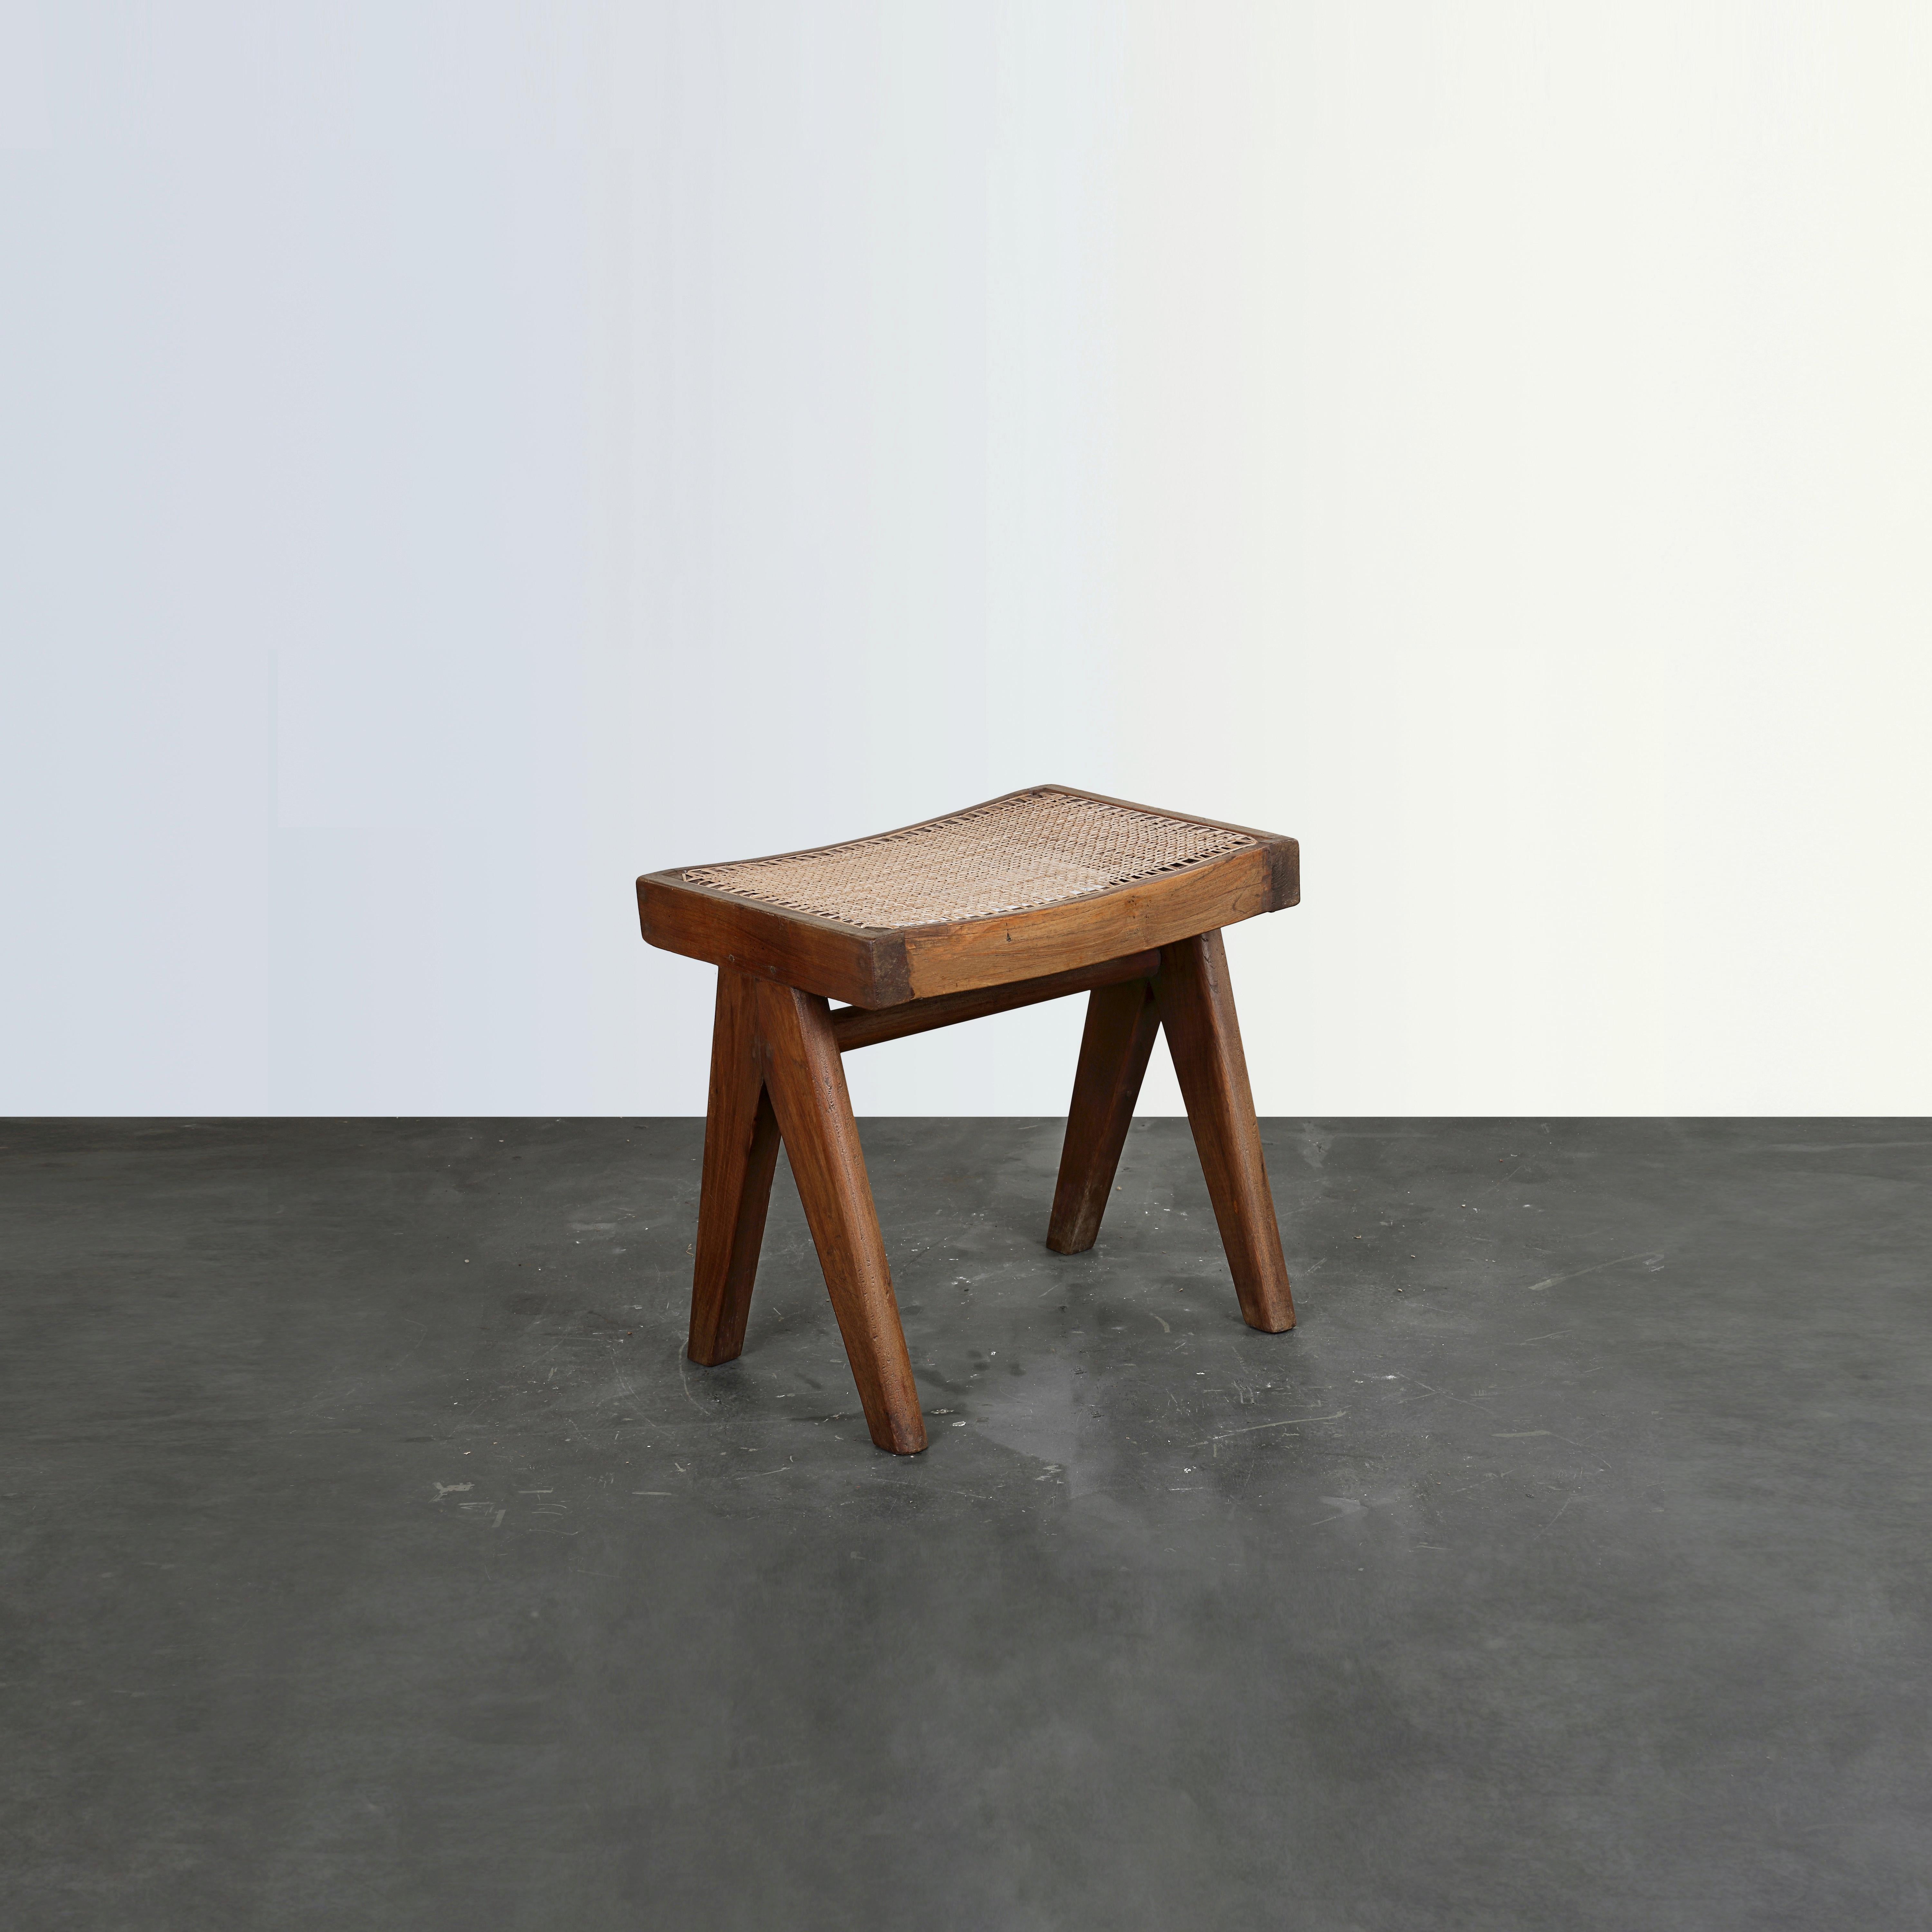 This stool is a fantastic piece; finally it's iconic. It appears so simple and yet so precise, where proportions seem to be perfect. Its patinated teak gives that objects a strong character, showing all that traces of age and its uniqueness. It has